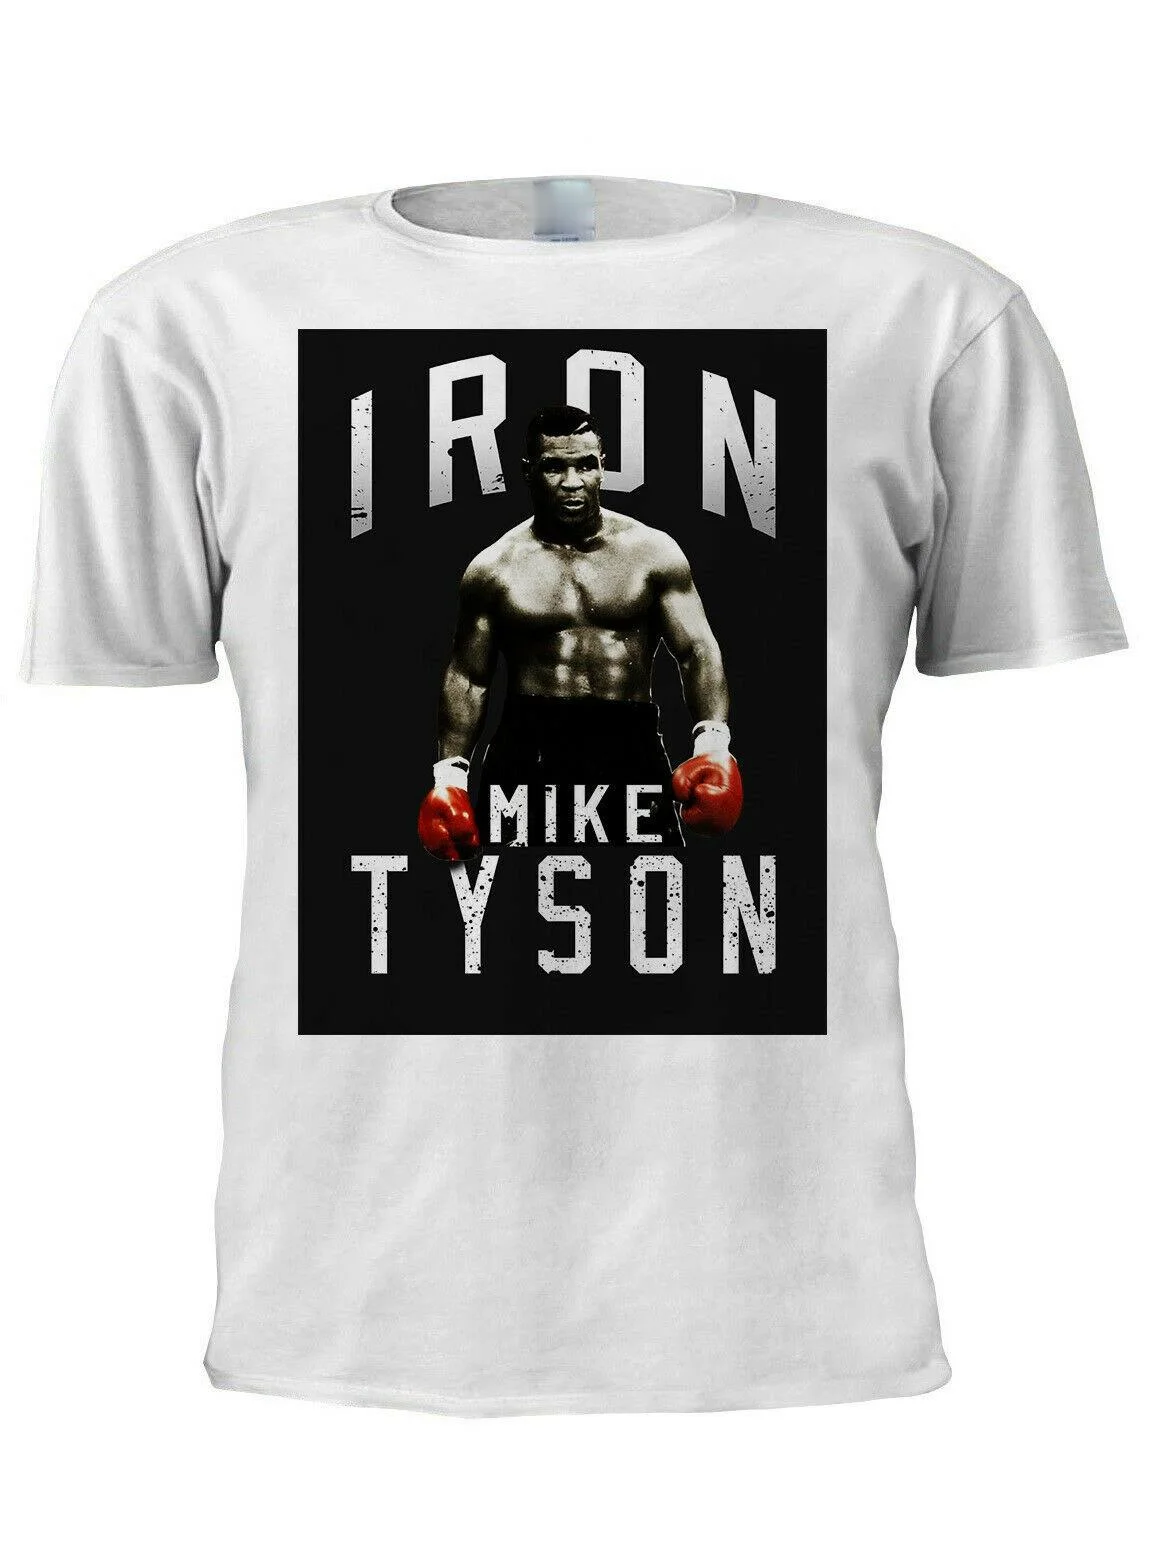 

Mike Tyson MMA Gym Boxing Training T-Shirt 100% Cotton O-Neck Summer Short Sleeve Casual Mens T-shirt Size S-3XL